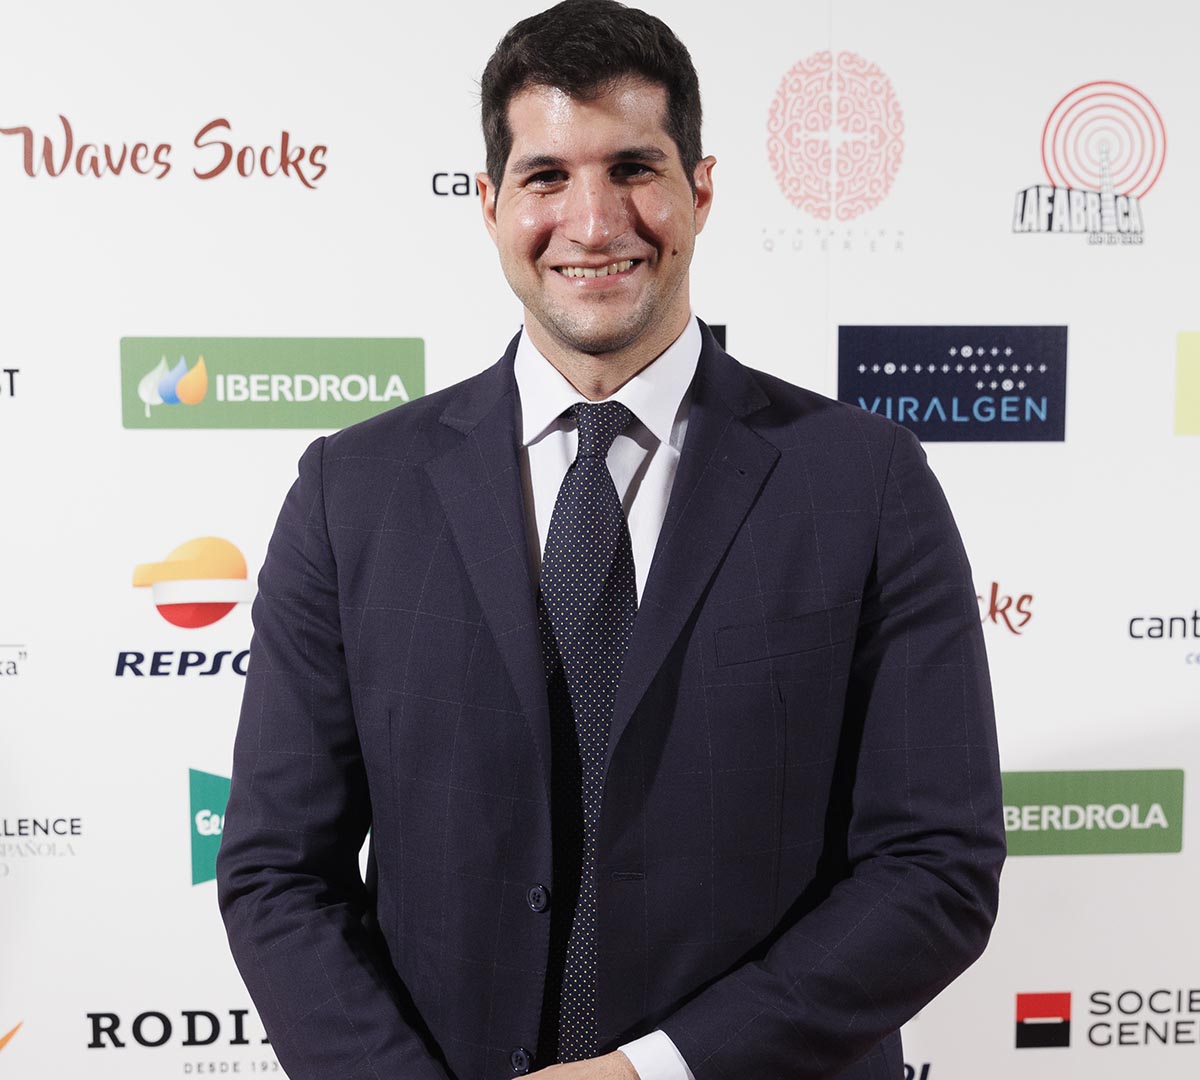 Julian Contreras at the photocall of the FundaciÃƒÂ³n Querer and Columbus event in Madrid on Tuesday, April 26, 2022.